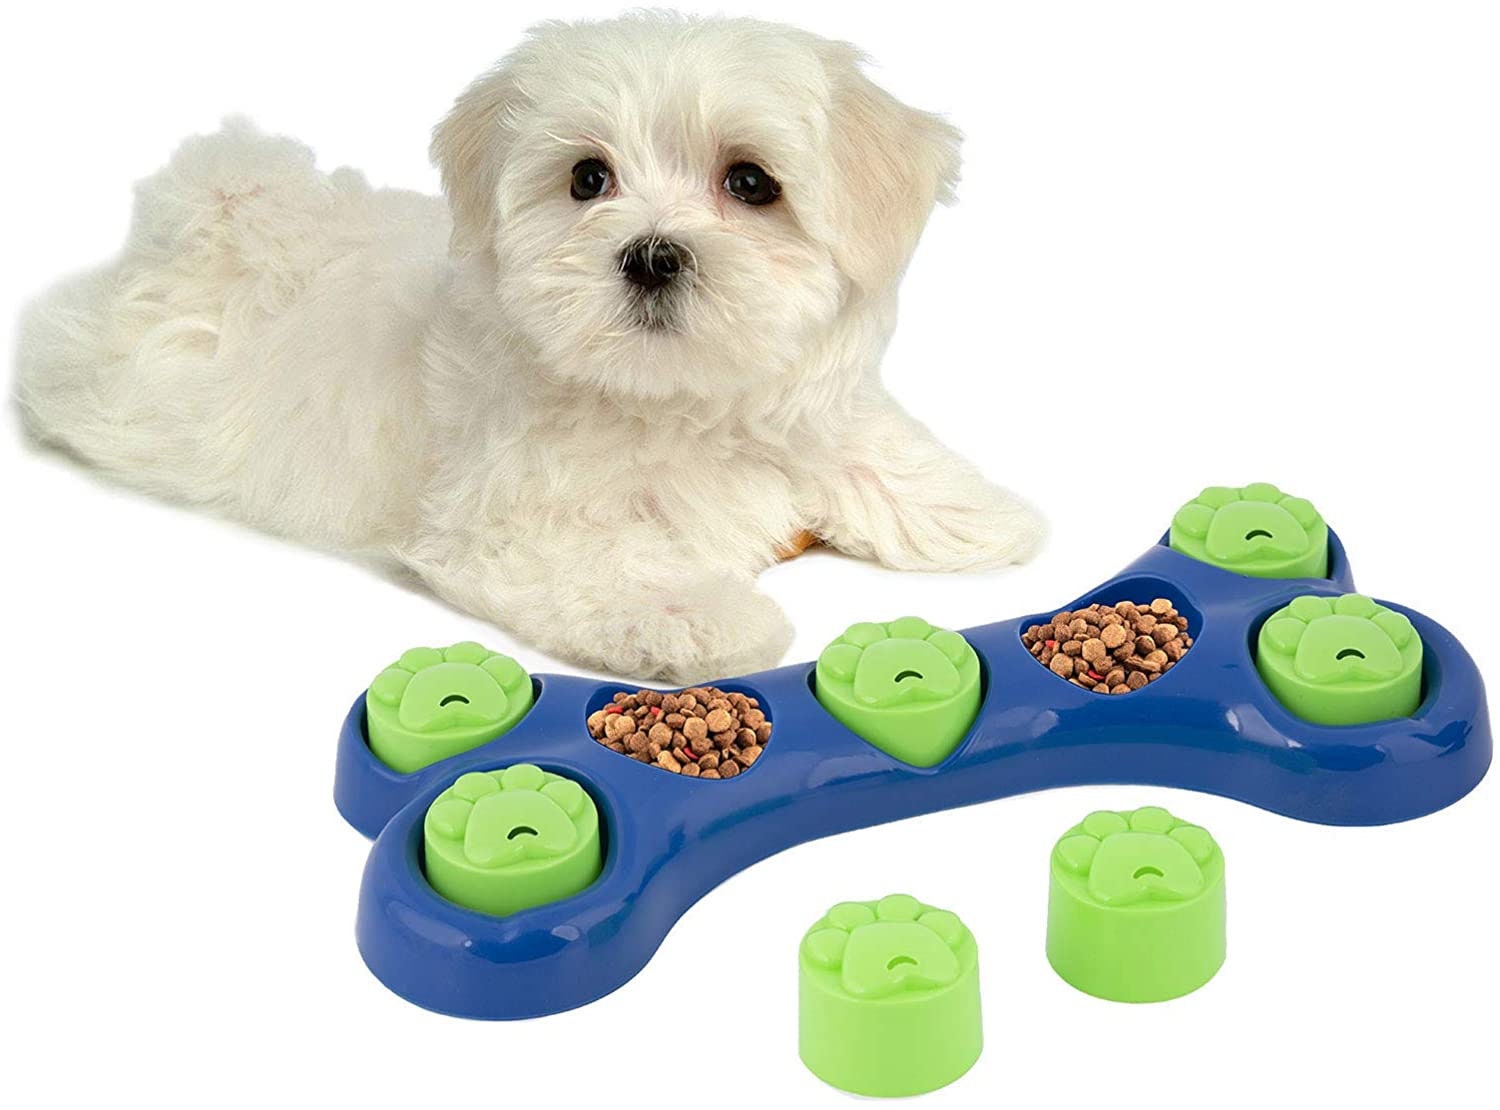  Petbobi Dog Puzzle Toys, Dog Treat Puzzle Slow Food Feeder  Dispenserfor Small Medium Large Dogs, Interactive Entertainment &  Distraction for Dogs Mentally Stimulating Game Level 1 2 3 : Pet Supplies